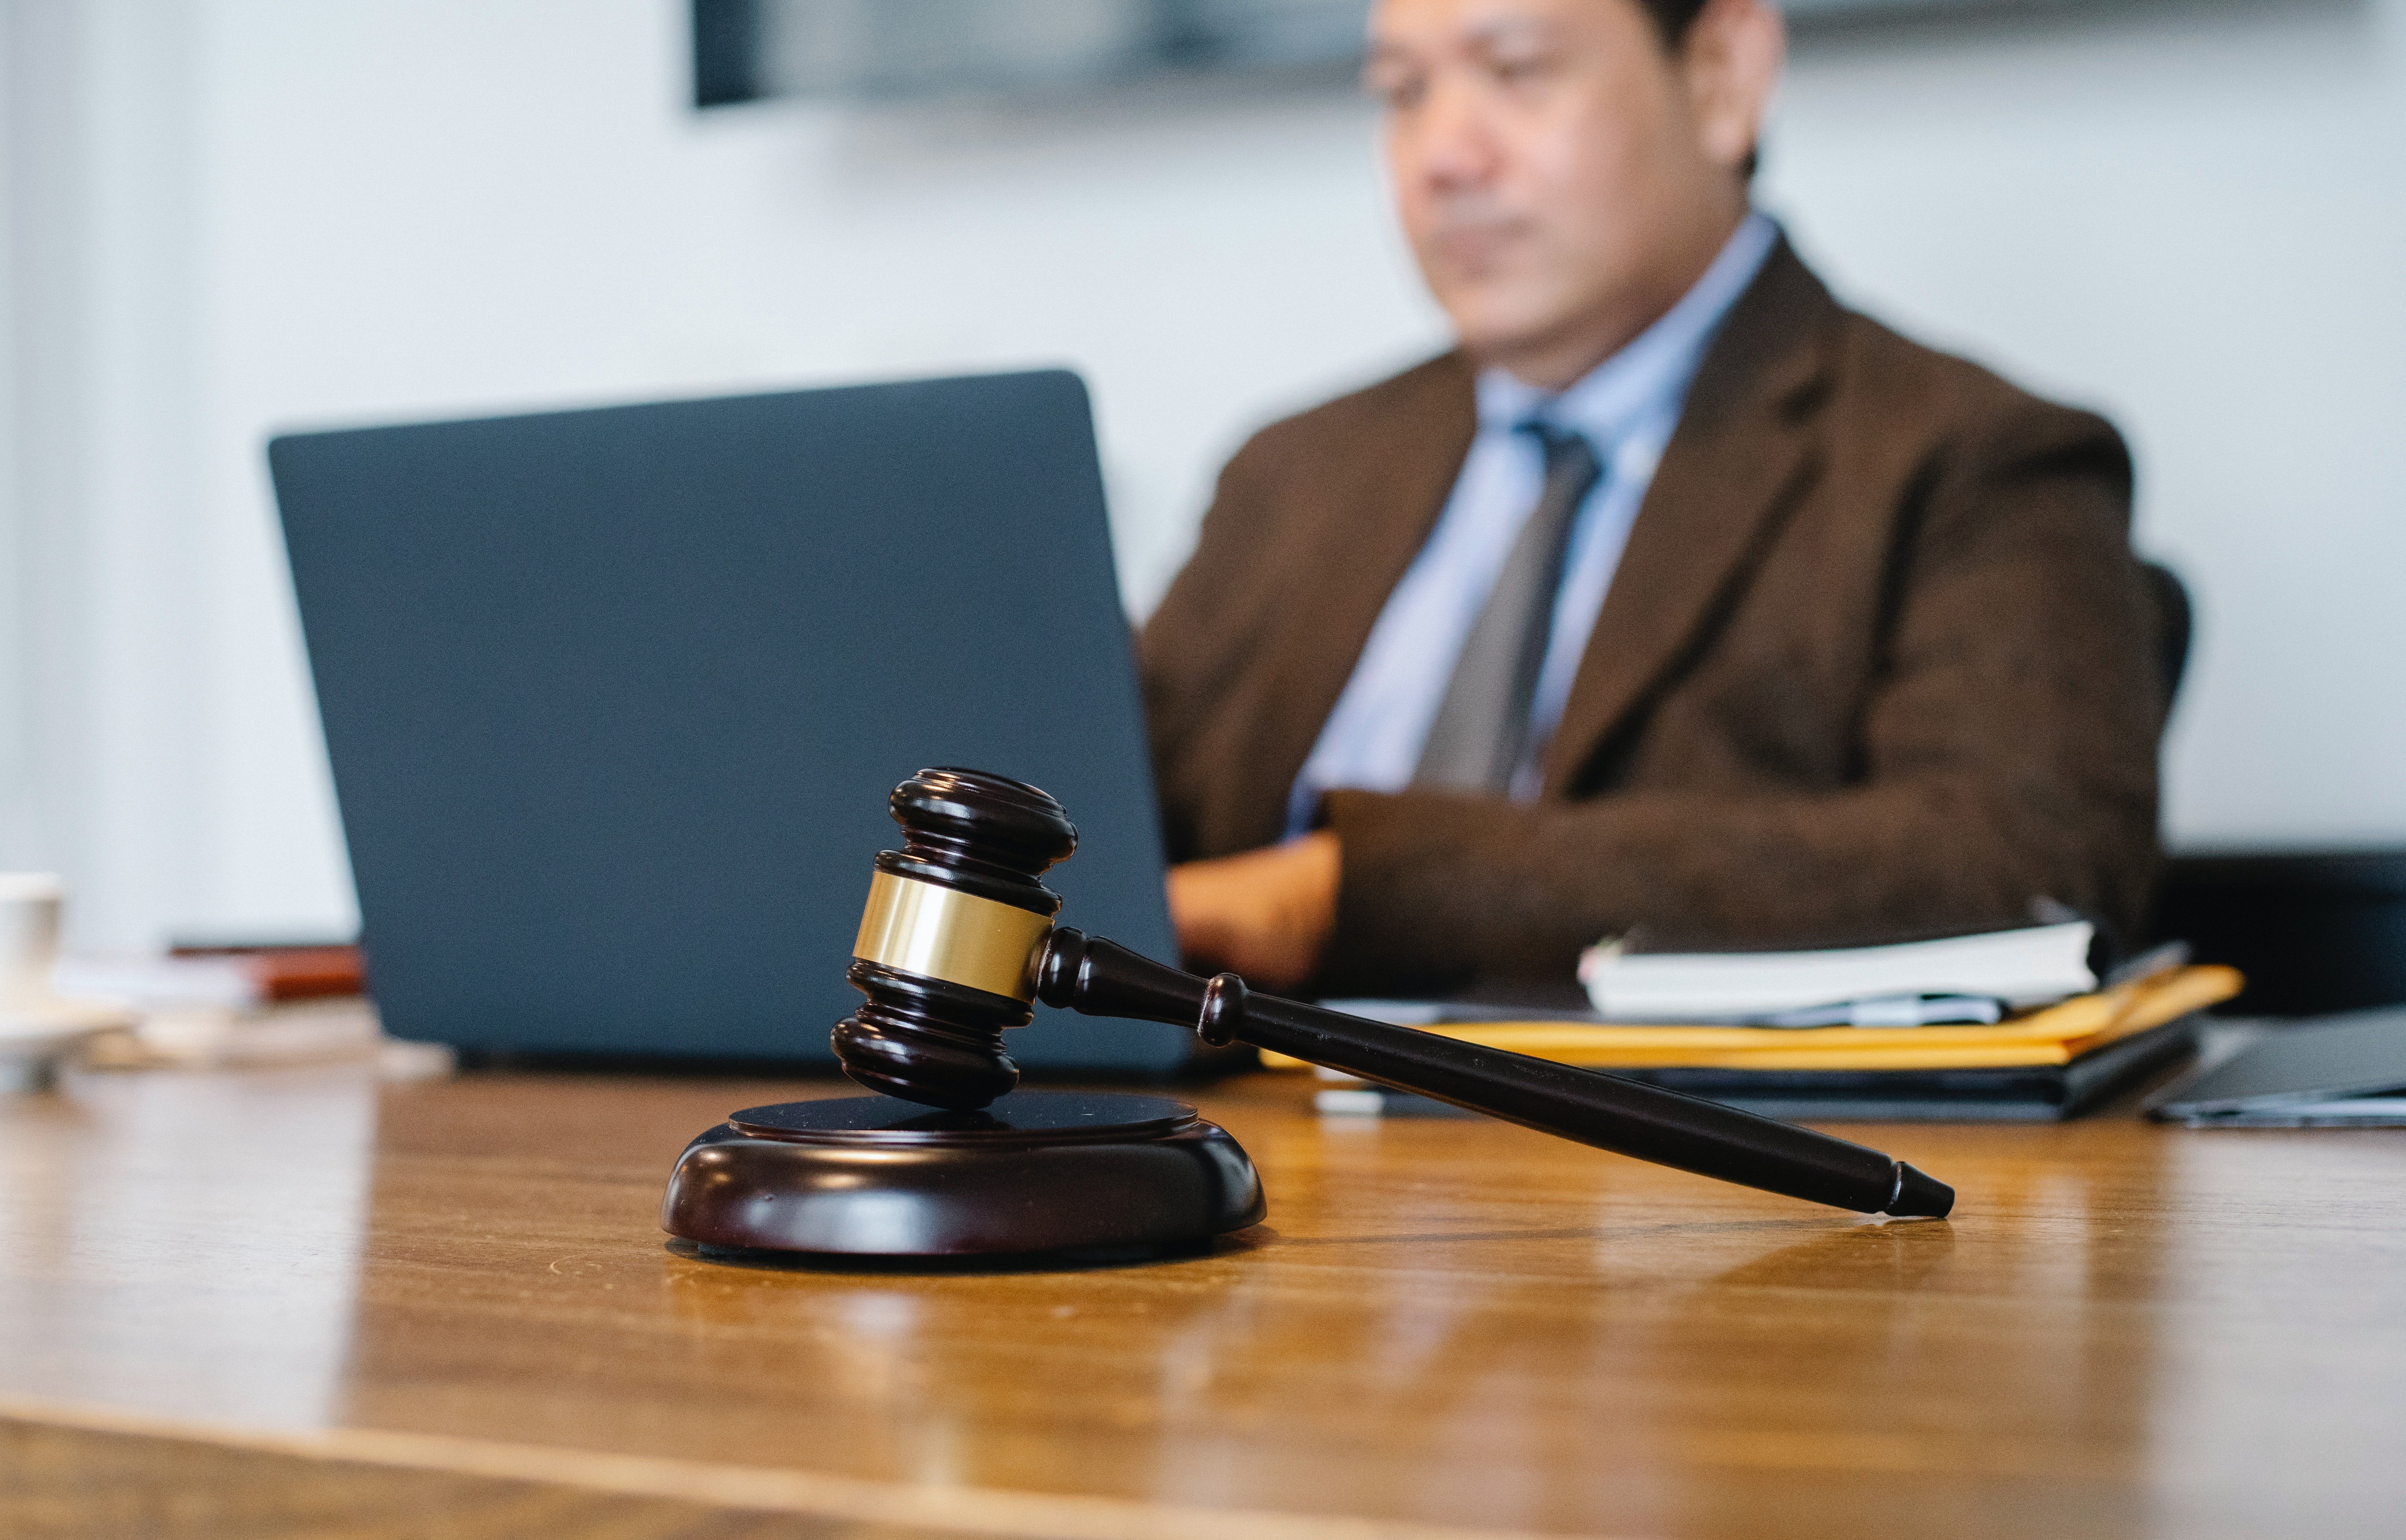 People online advised OP to consult a lawyer | Source: Pexels